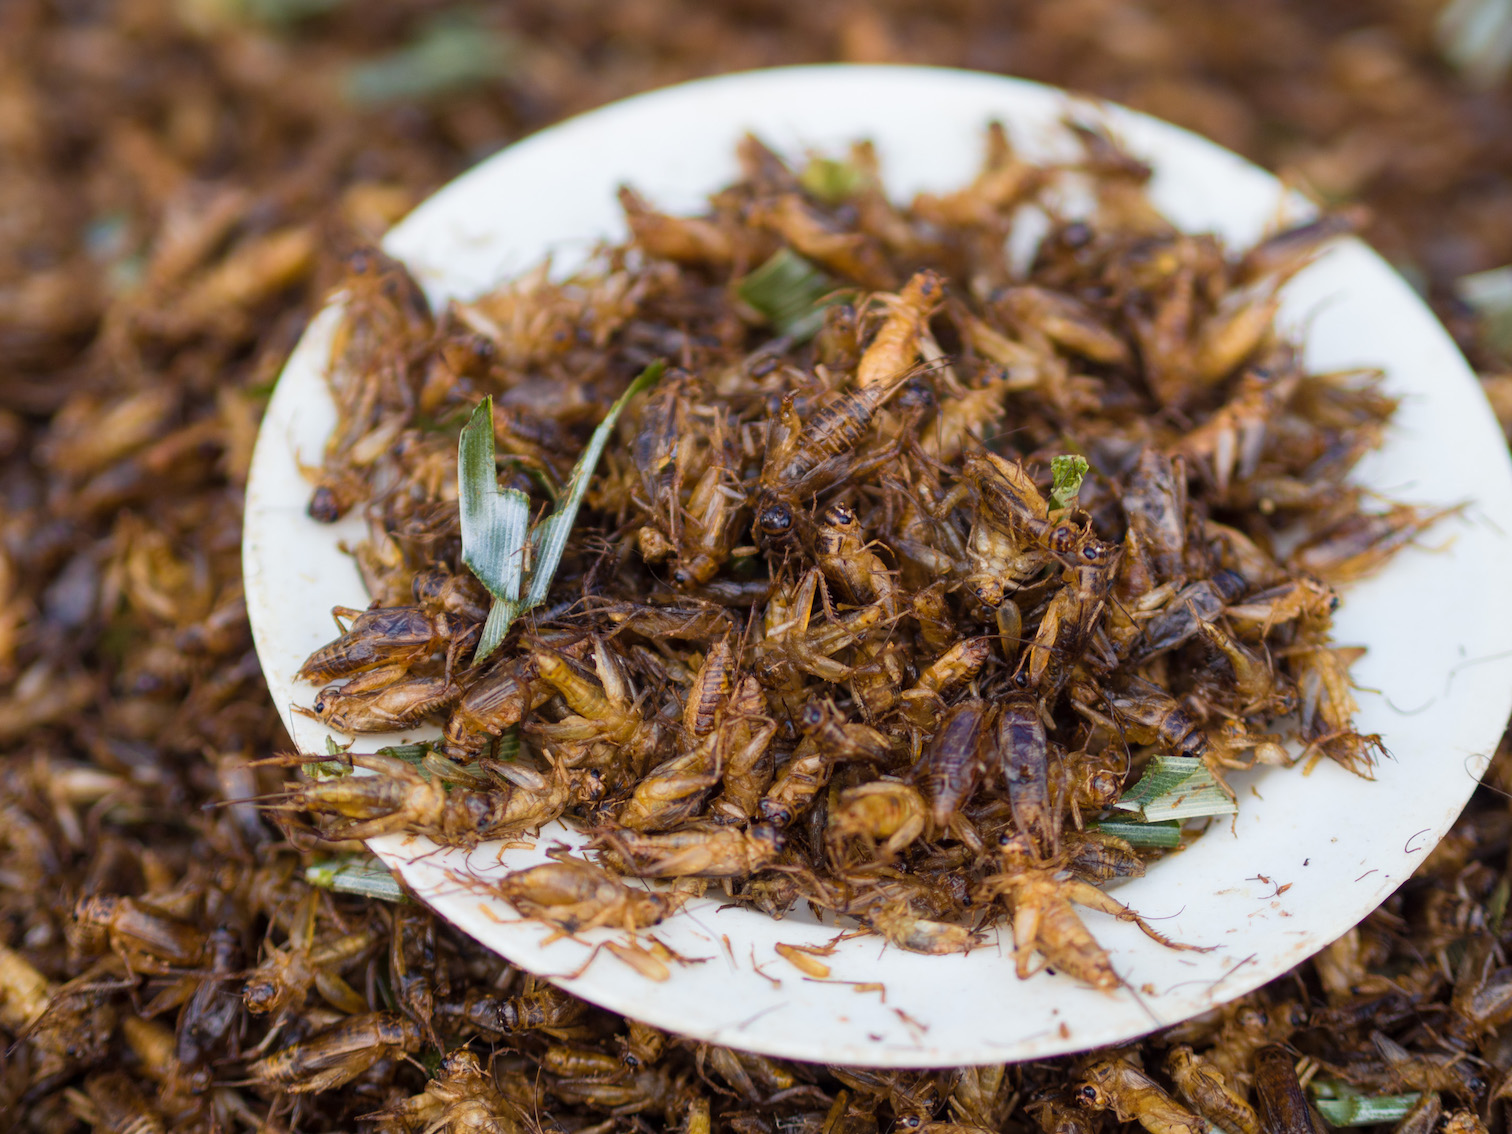 You WILL eat the bugs: Major brands quietly slipping insects into your food